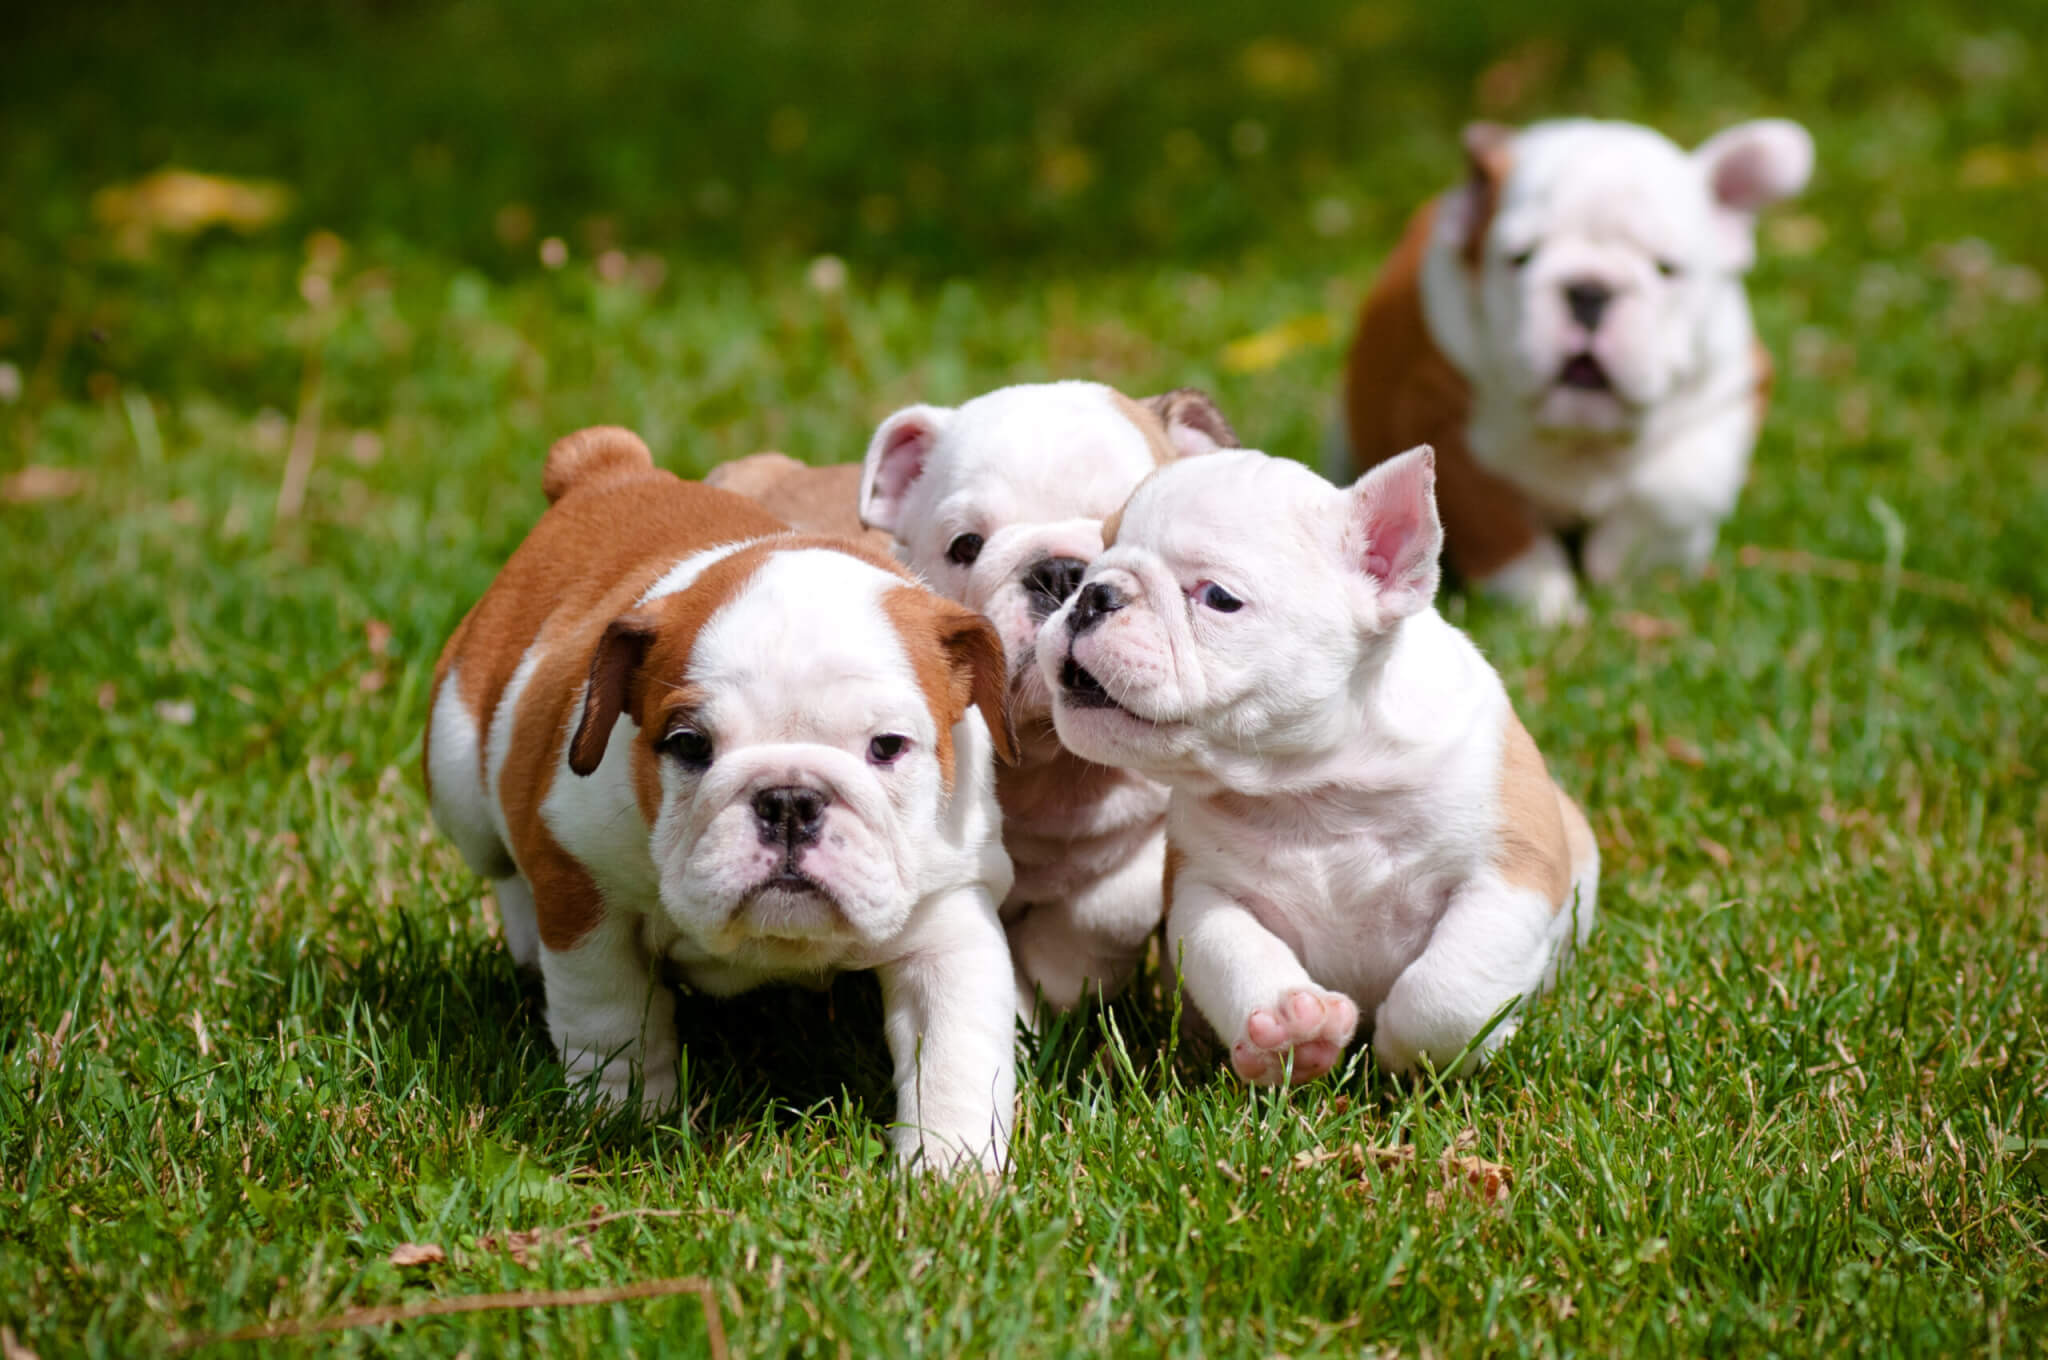 National Bulldogs Are Beautiful Day (April 21st) | Days Of The Year